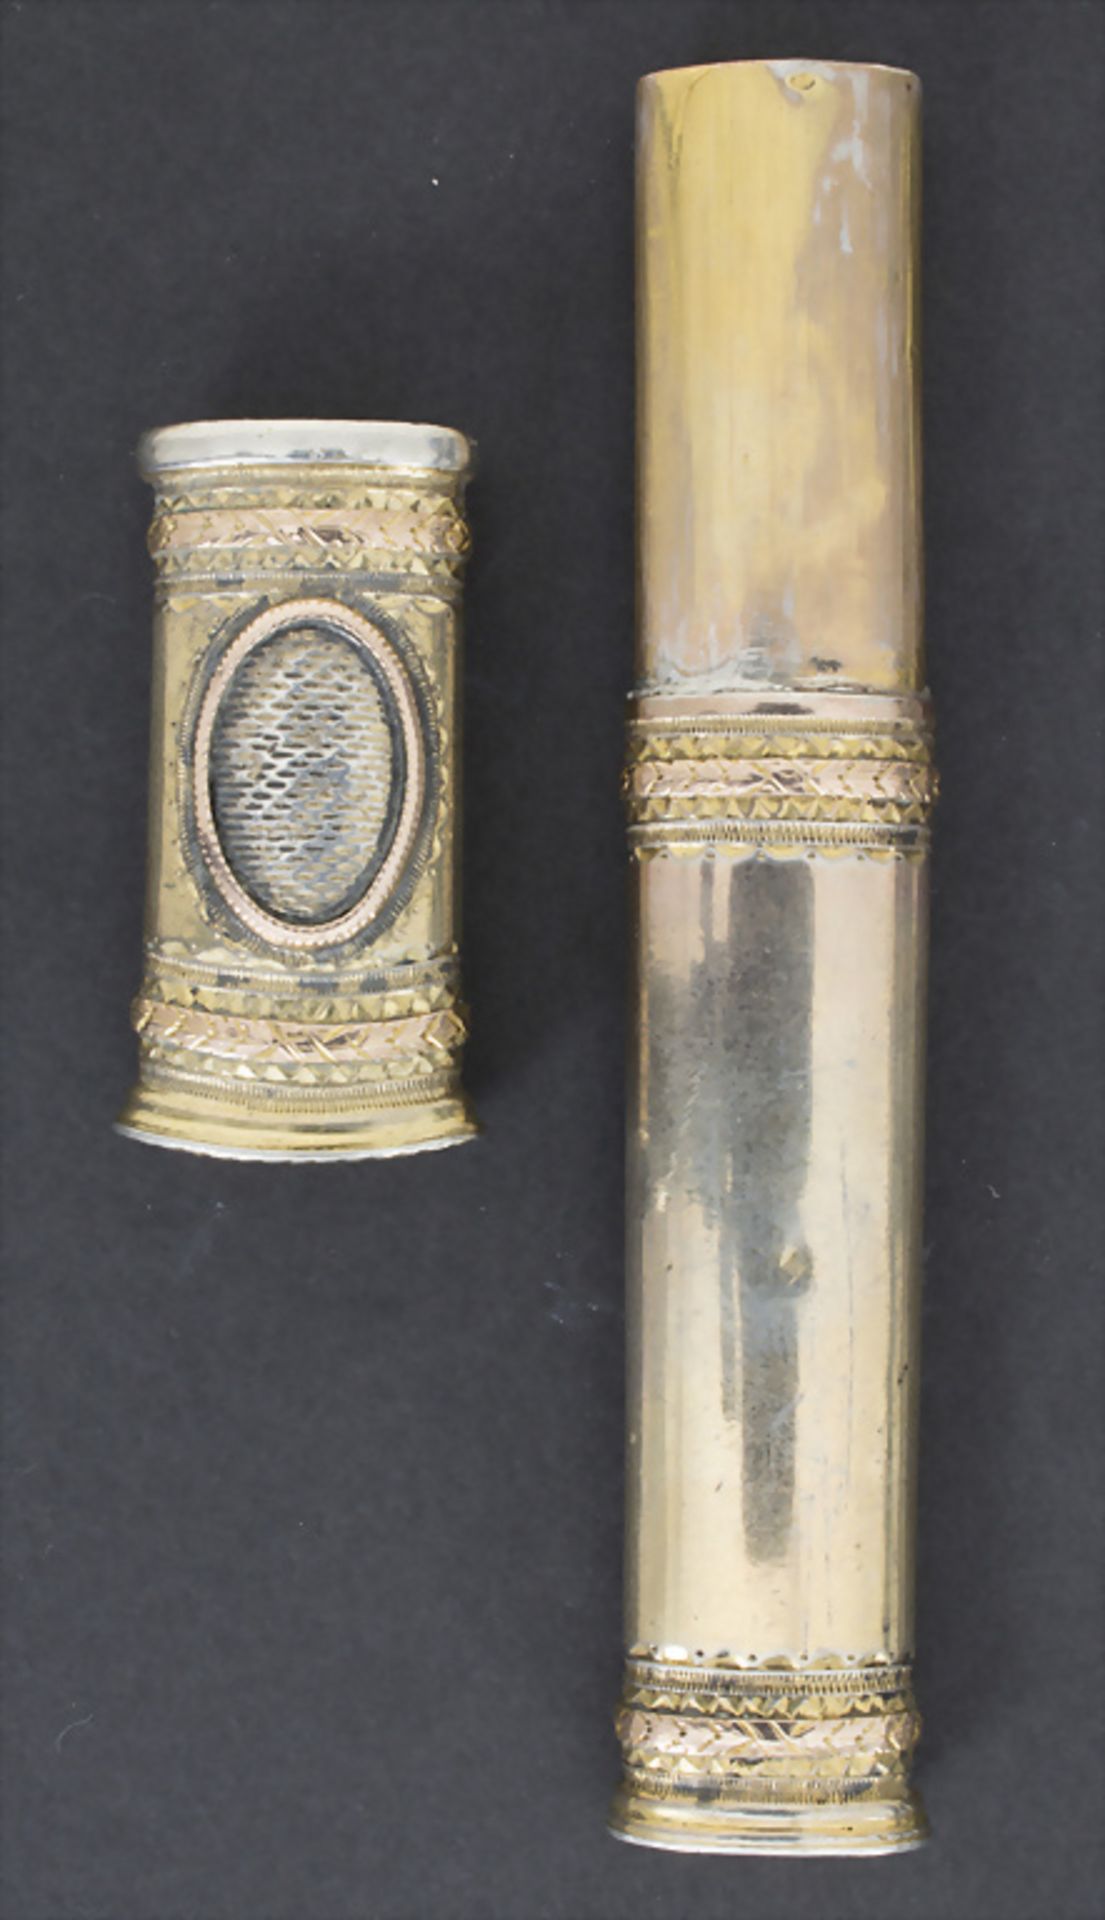 Empire Nadeletui in Silber und Gold / An Empire silver and gold needle case, Frankreich, um 1800 - Image 3 of 3